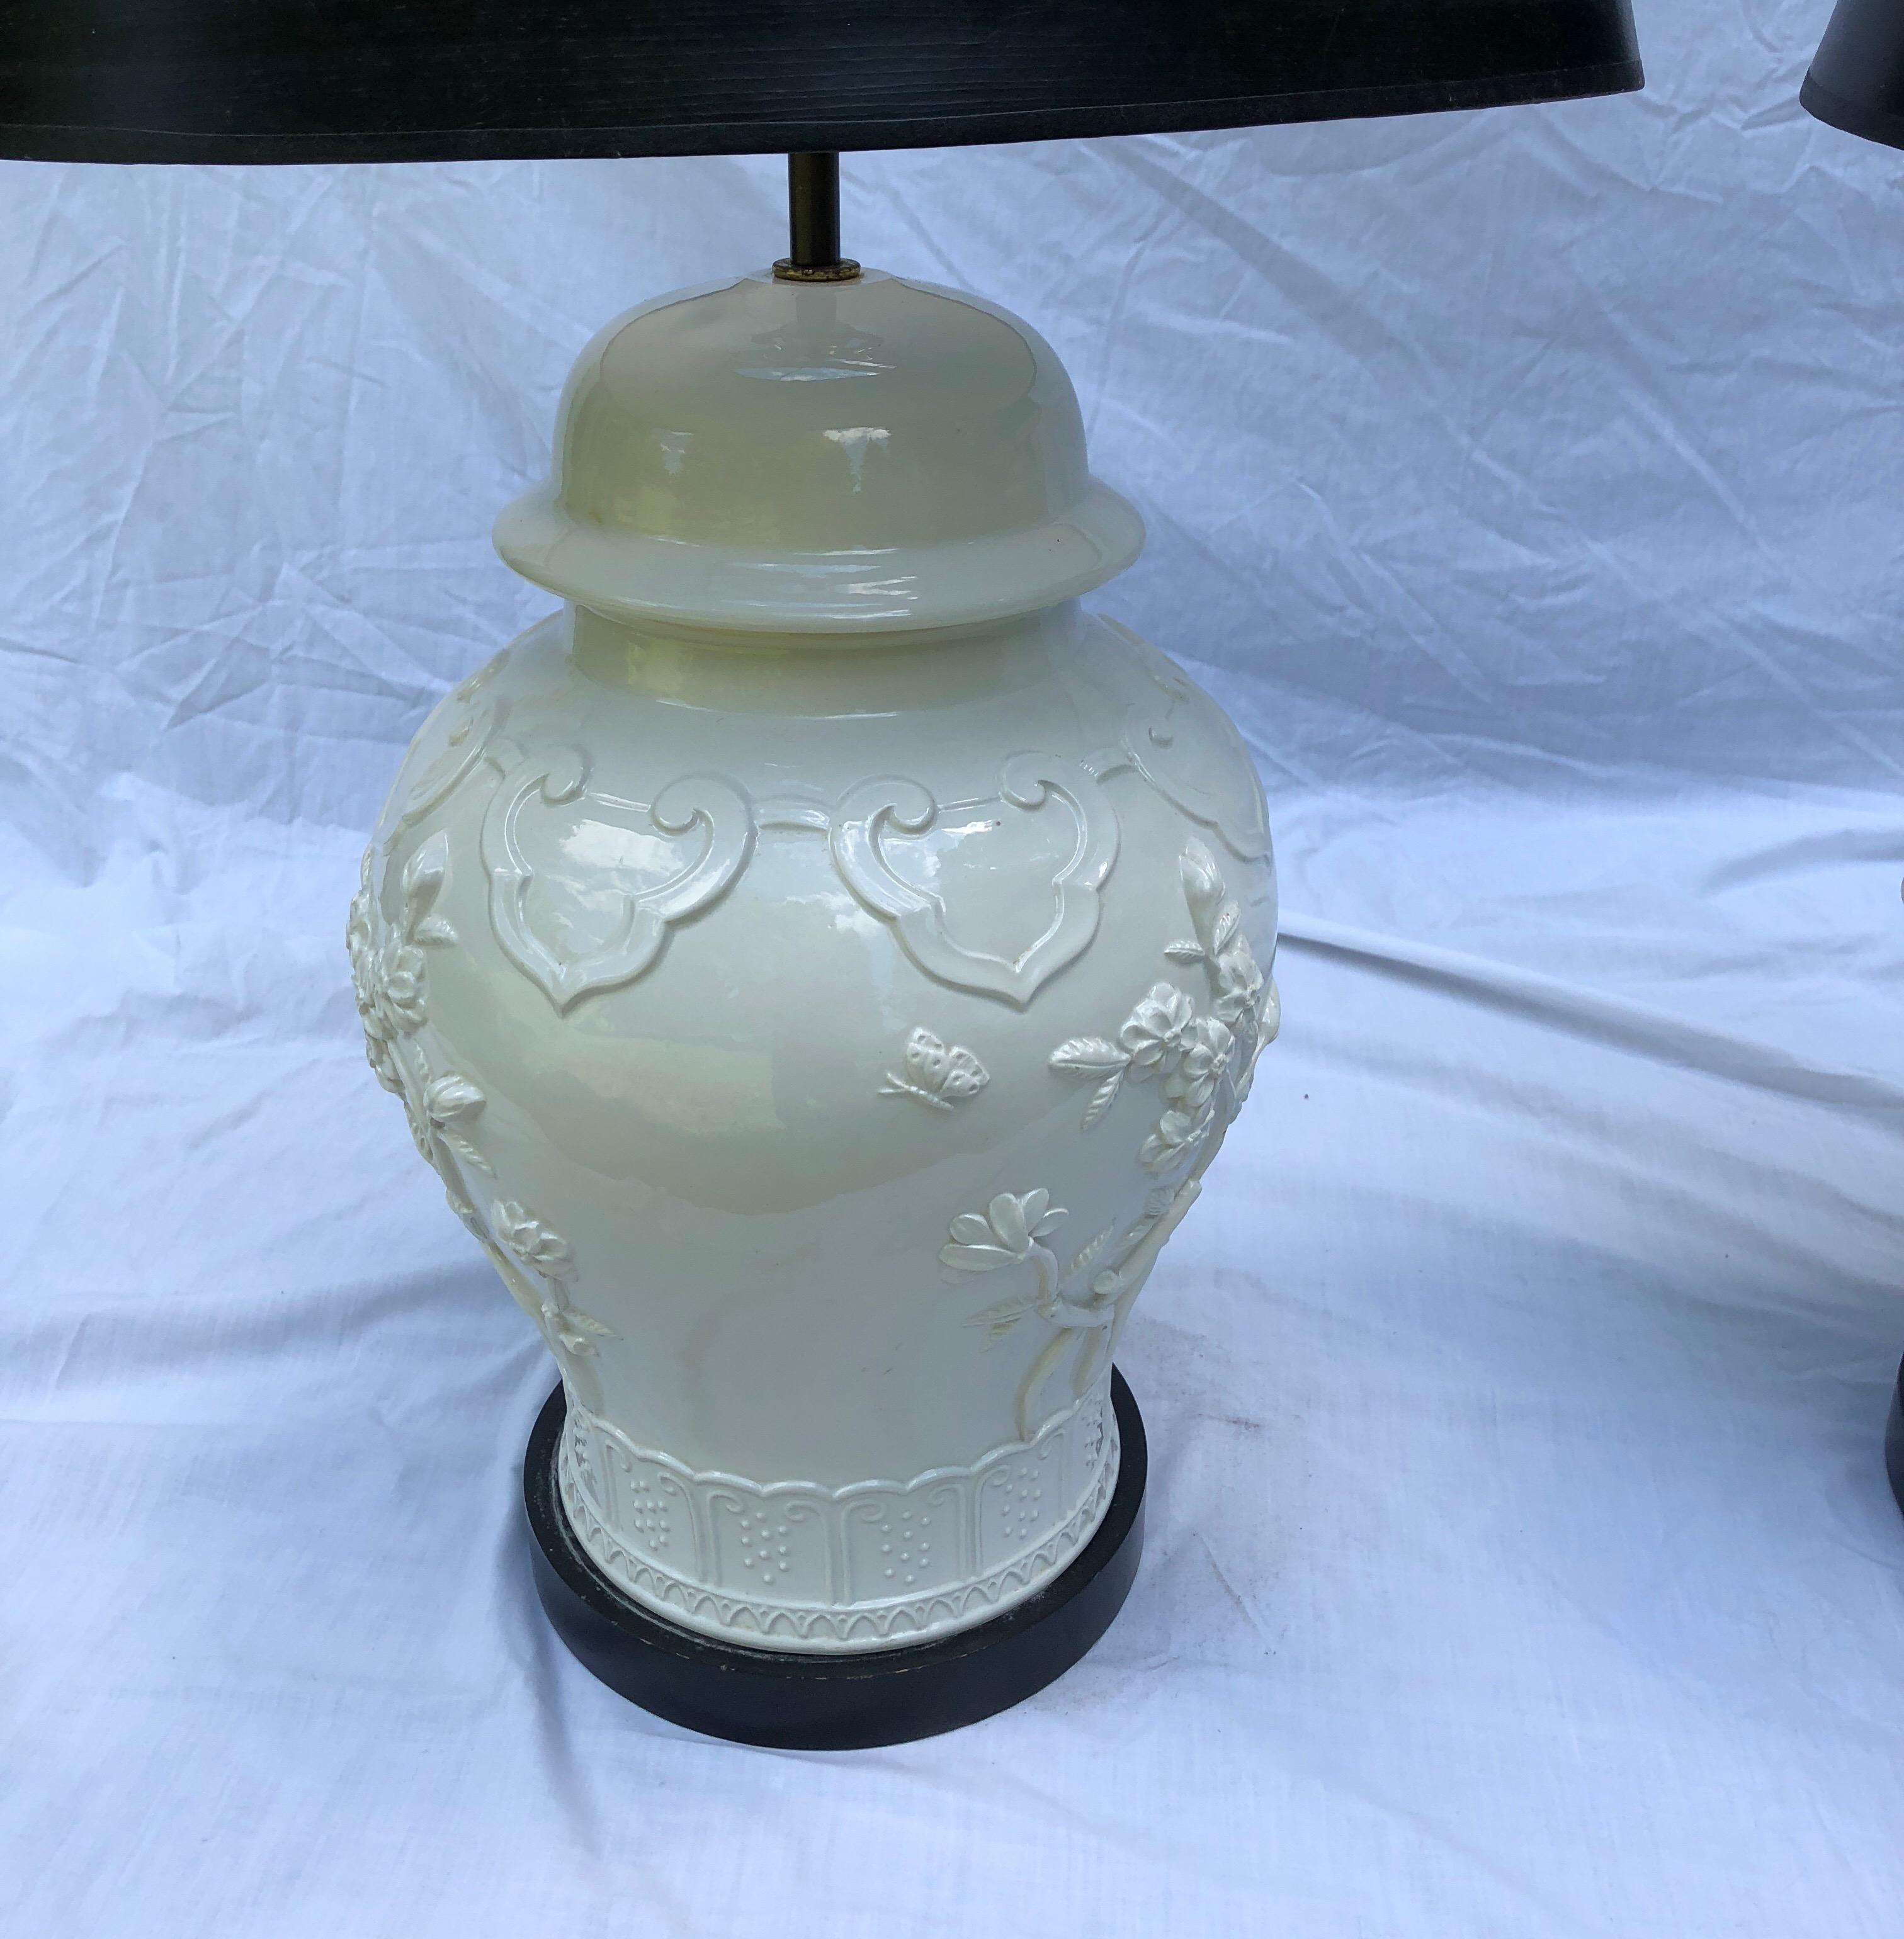 Pair of Blanc de Chine contemporary ginger jars mounted as lamps. Lamps probably made by
Frederick Cooper. Nice gutsy size, mint condition and new wiring. Shades not included.